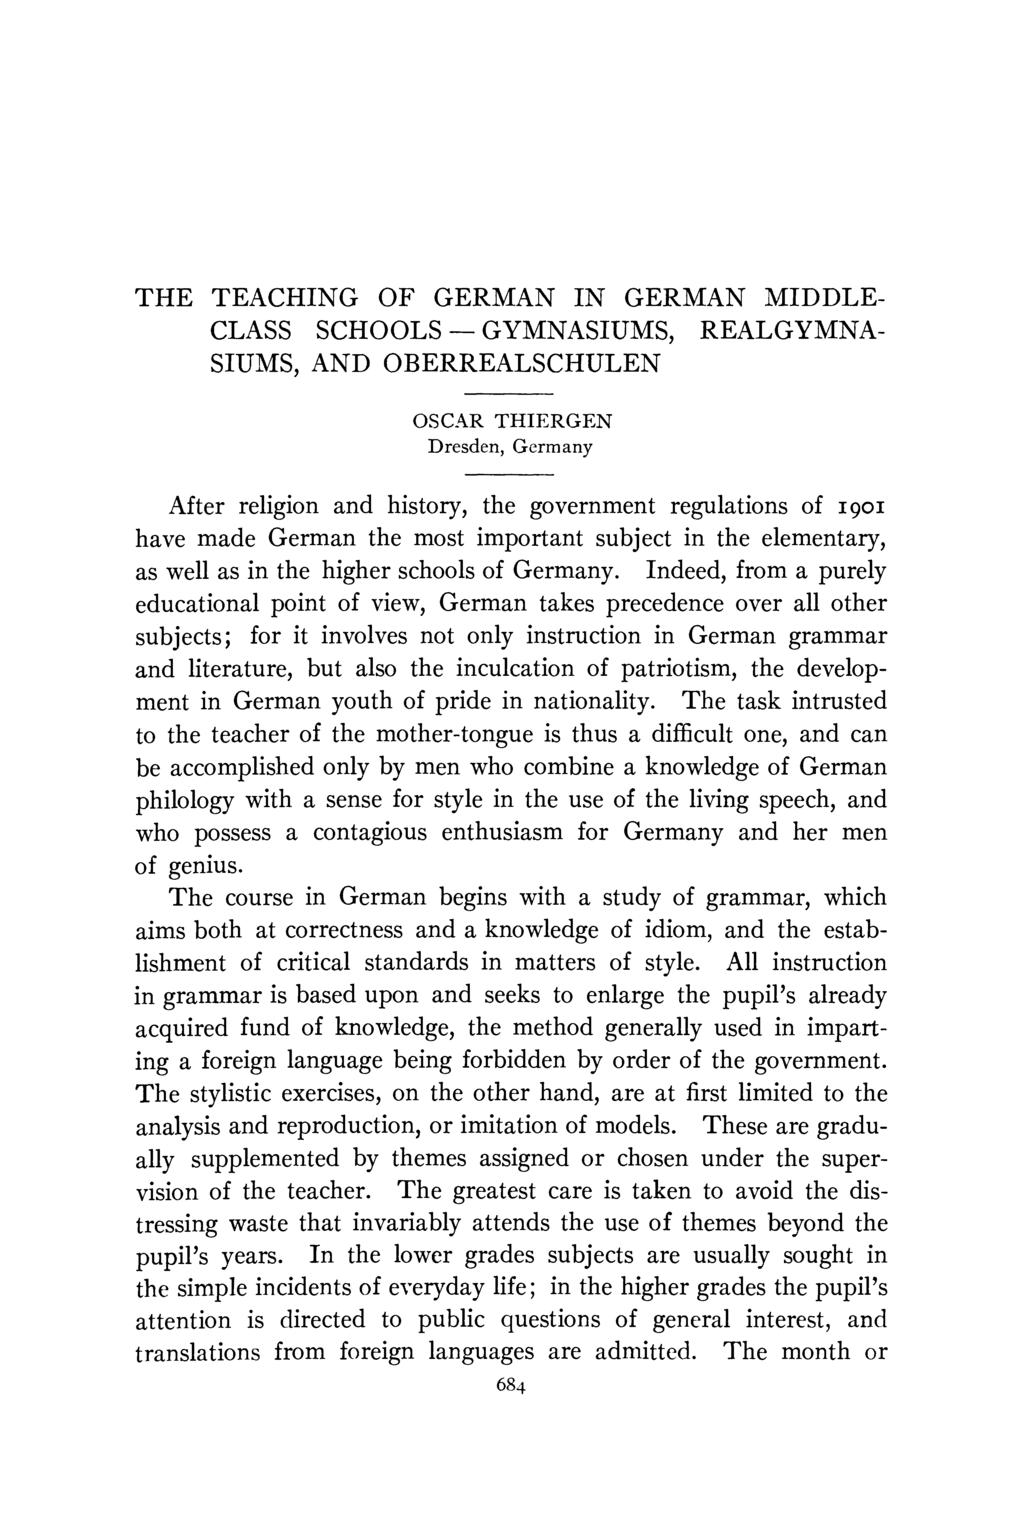 THE TEACHING OF GERMAN IN GERMAN MIDDLE- CLASS SCHOOLS - GYMNASIUMS, REALGYMNA- SIUMS, AND OBERREALSCHULEN OSCAR THIERGEN Dresden, Germany After religion and history, the government regulations of